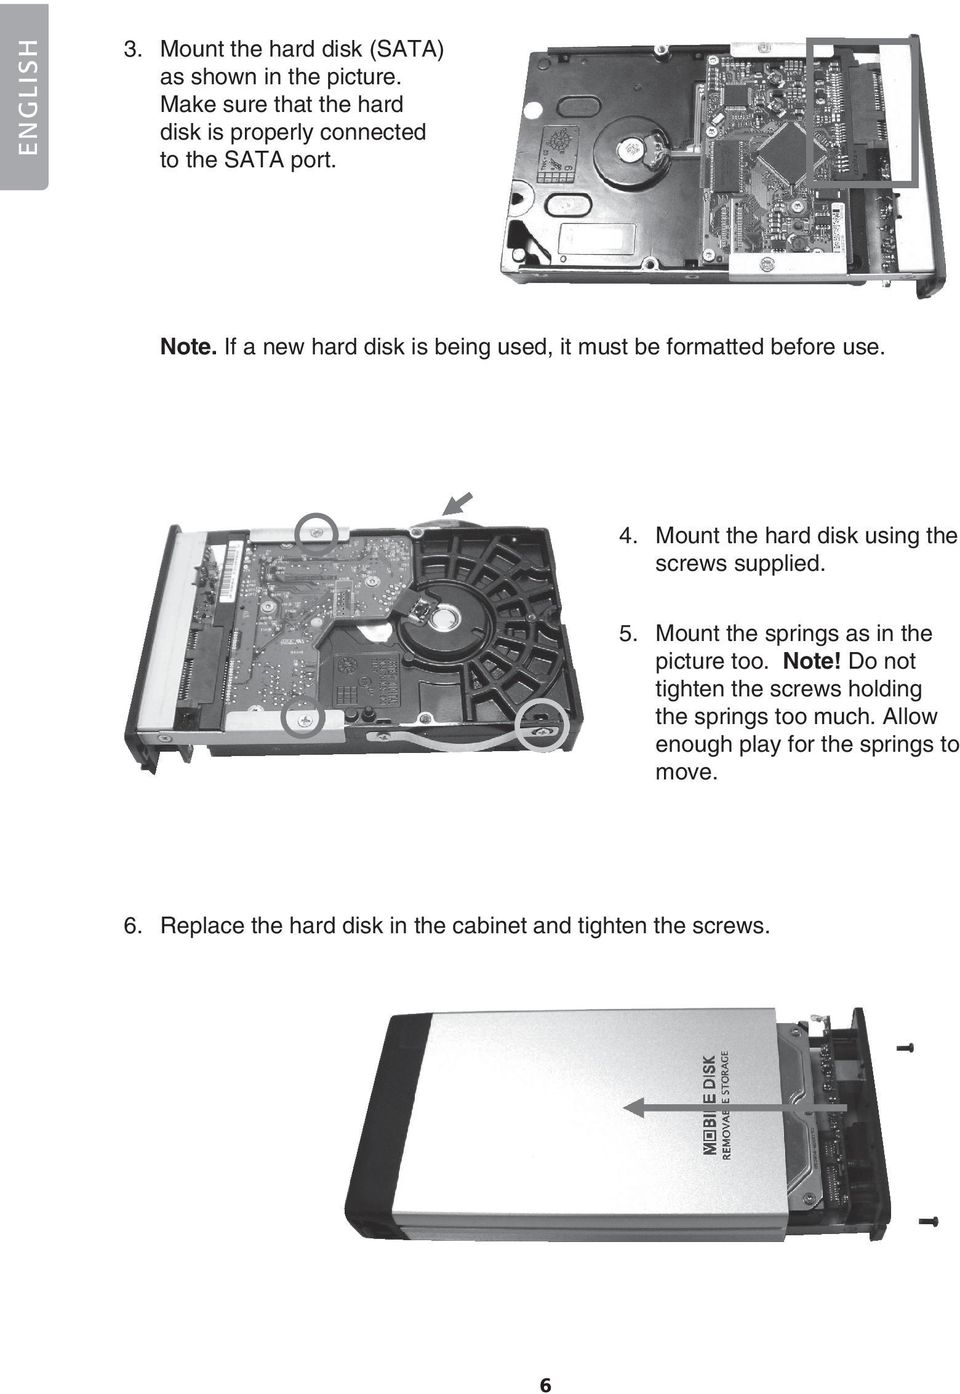 If a new hard disk is being used, it must be formatted before use. 4. Mount the hard disk using the screws supplied.